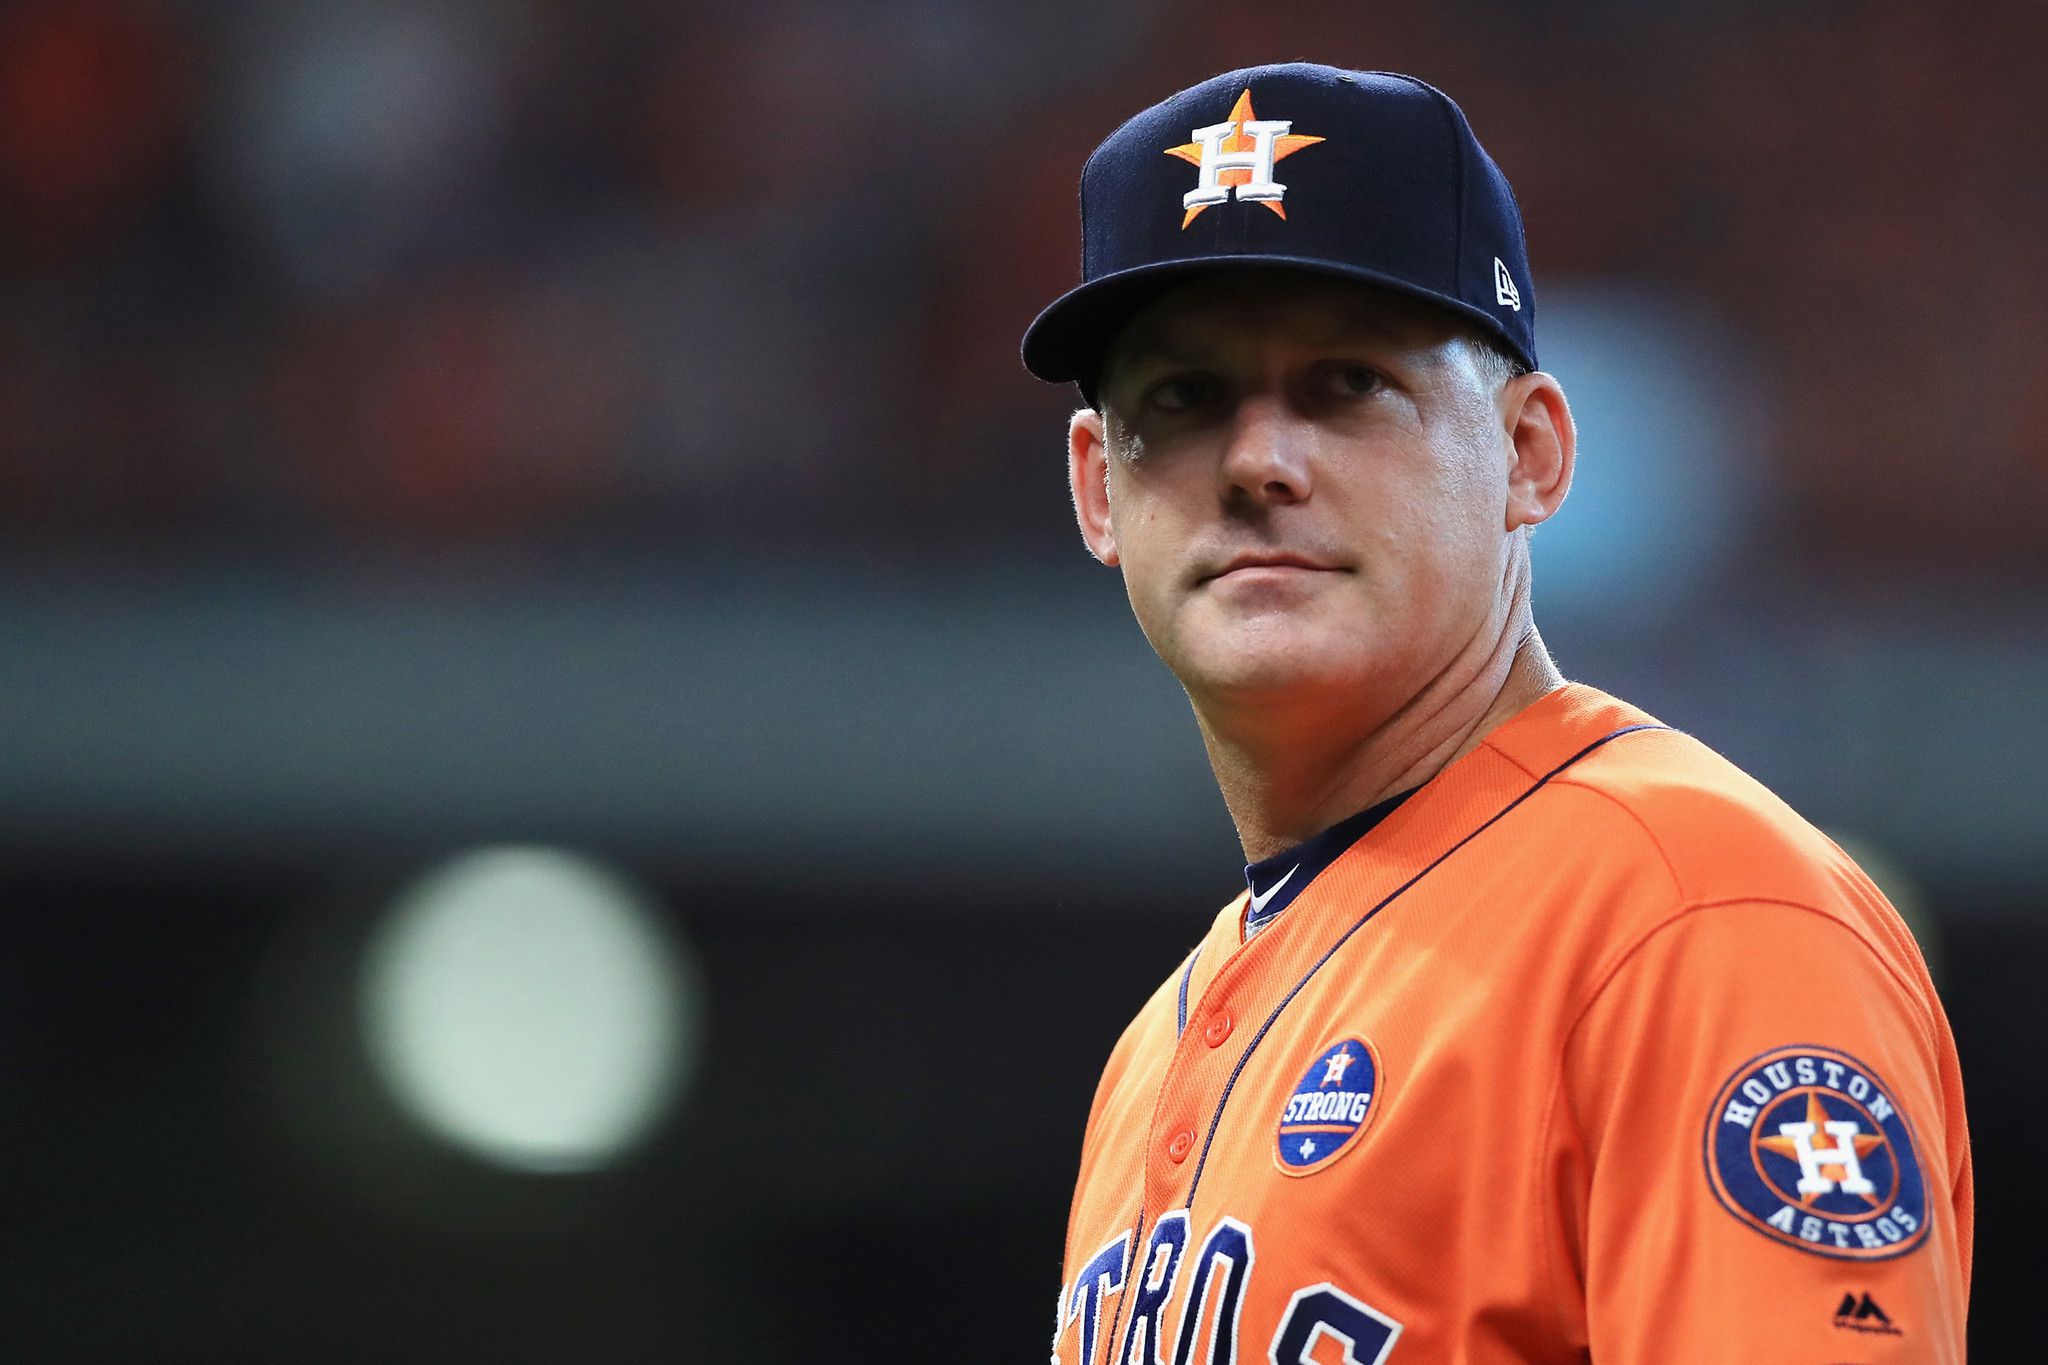 A.J. Hinch, fired by Astros over cheating scandal, takes over as